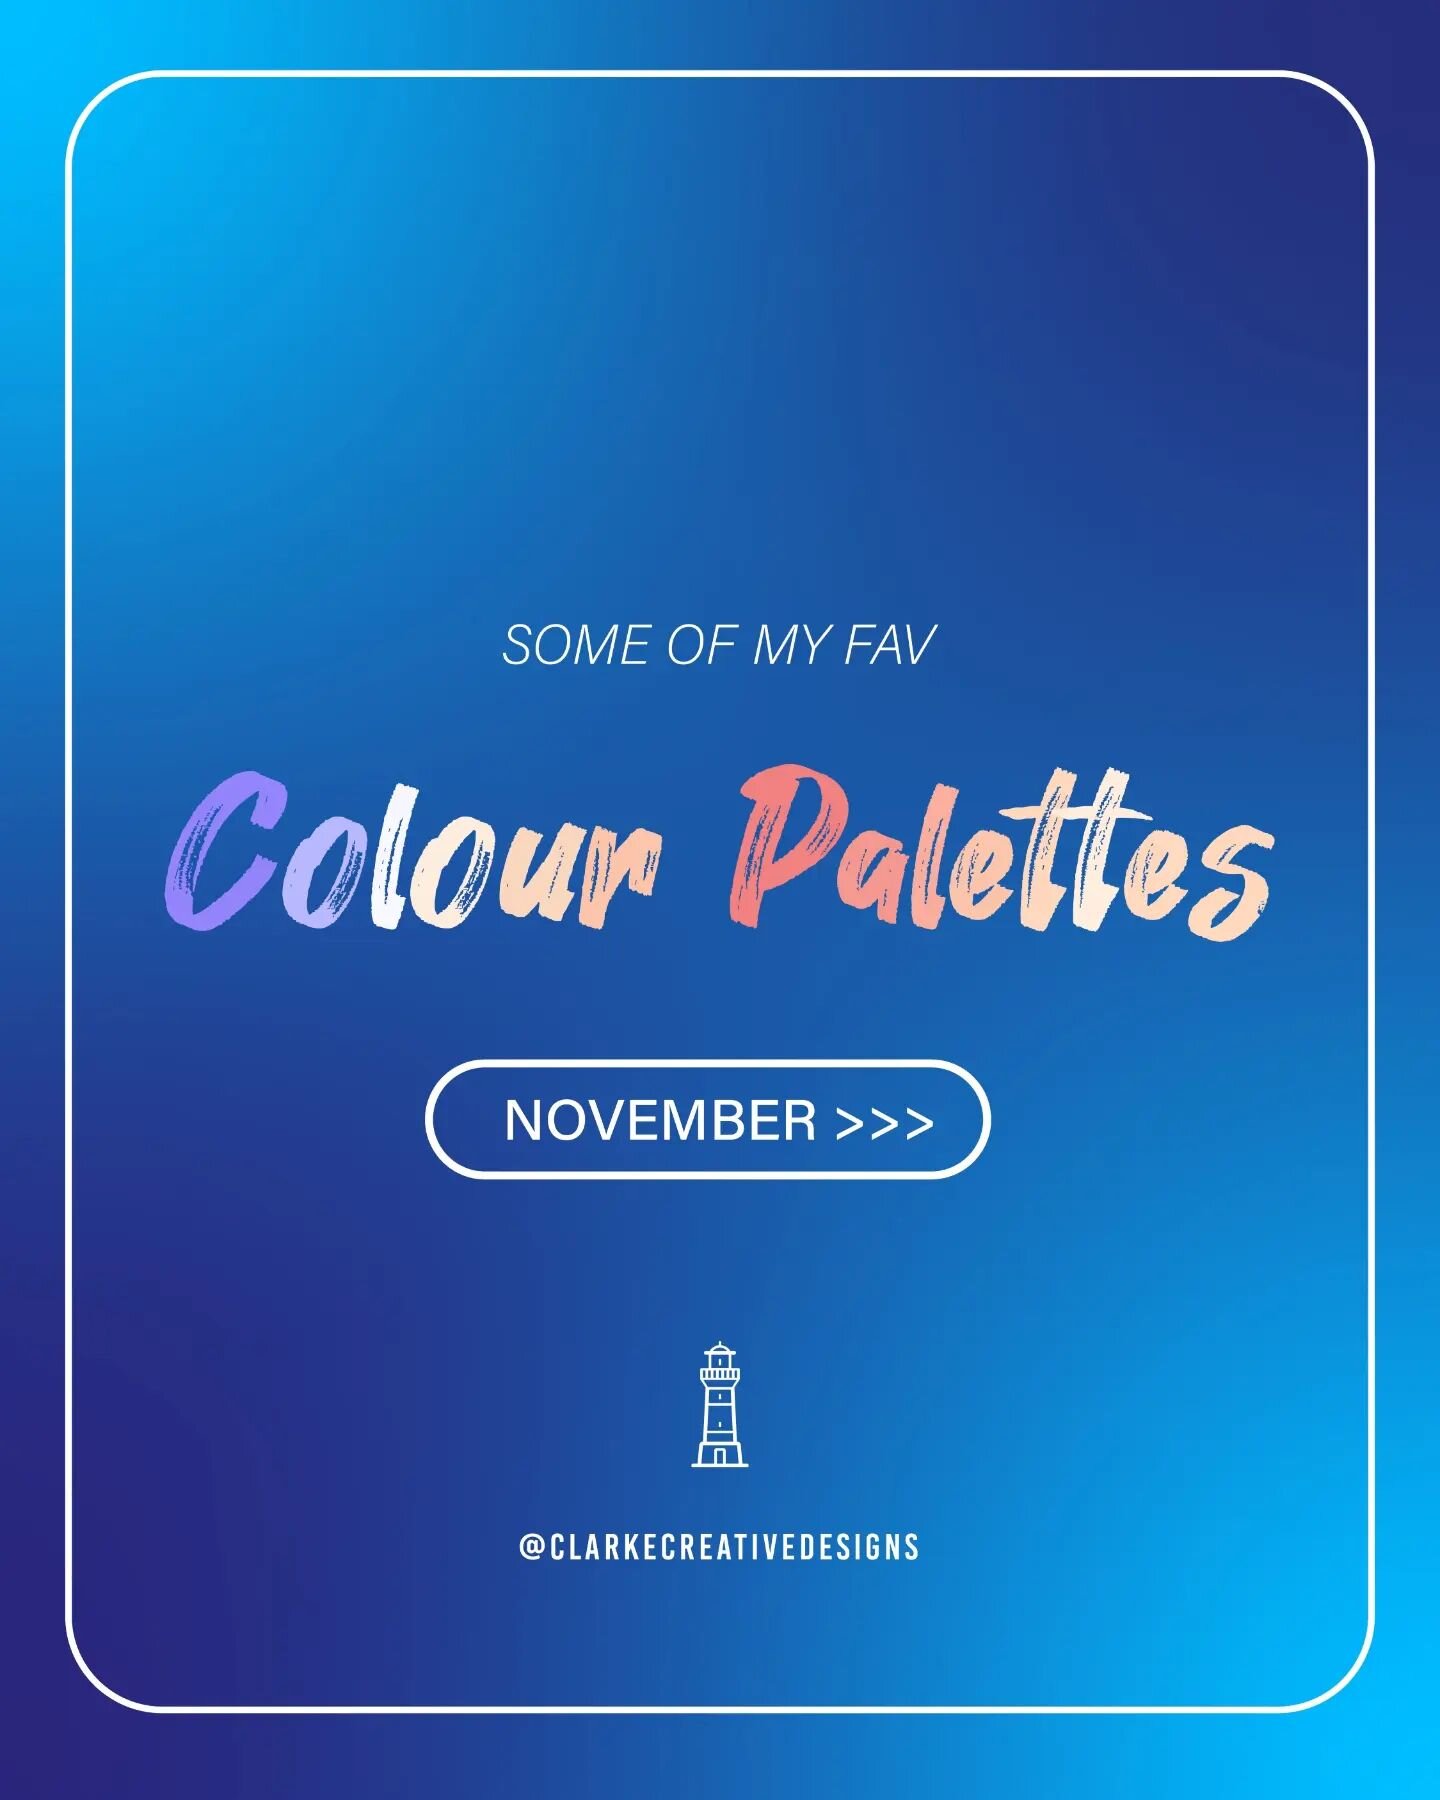 COLOUR PALETTES OF THE MONTH 🎨

Getting very strong pastel vibes from this months very monochromatic group of colour palettes for the month of November! 🤩

Some gorgeous gorgeous gorgeous tones used this month, which I am loving! 🙌🏼 

If you see 